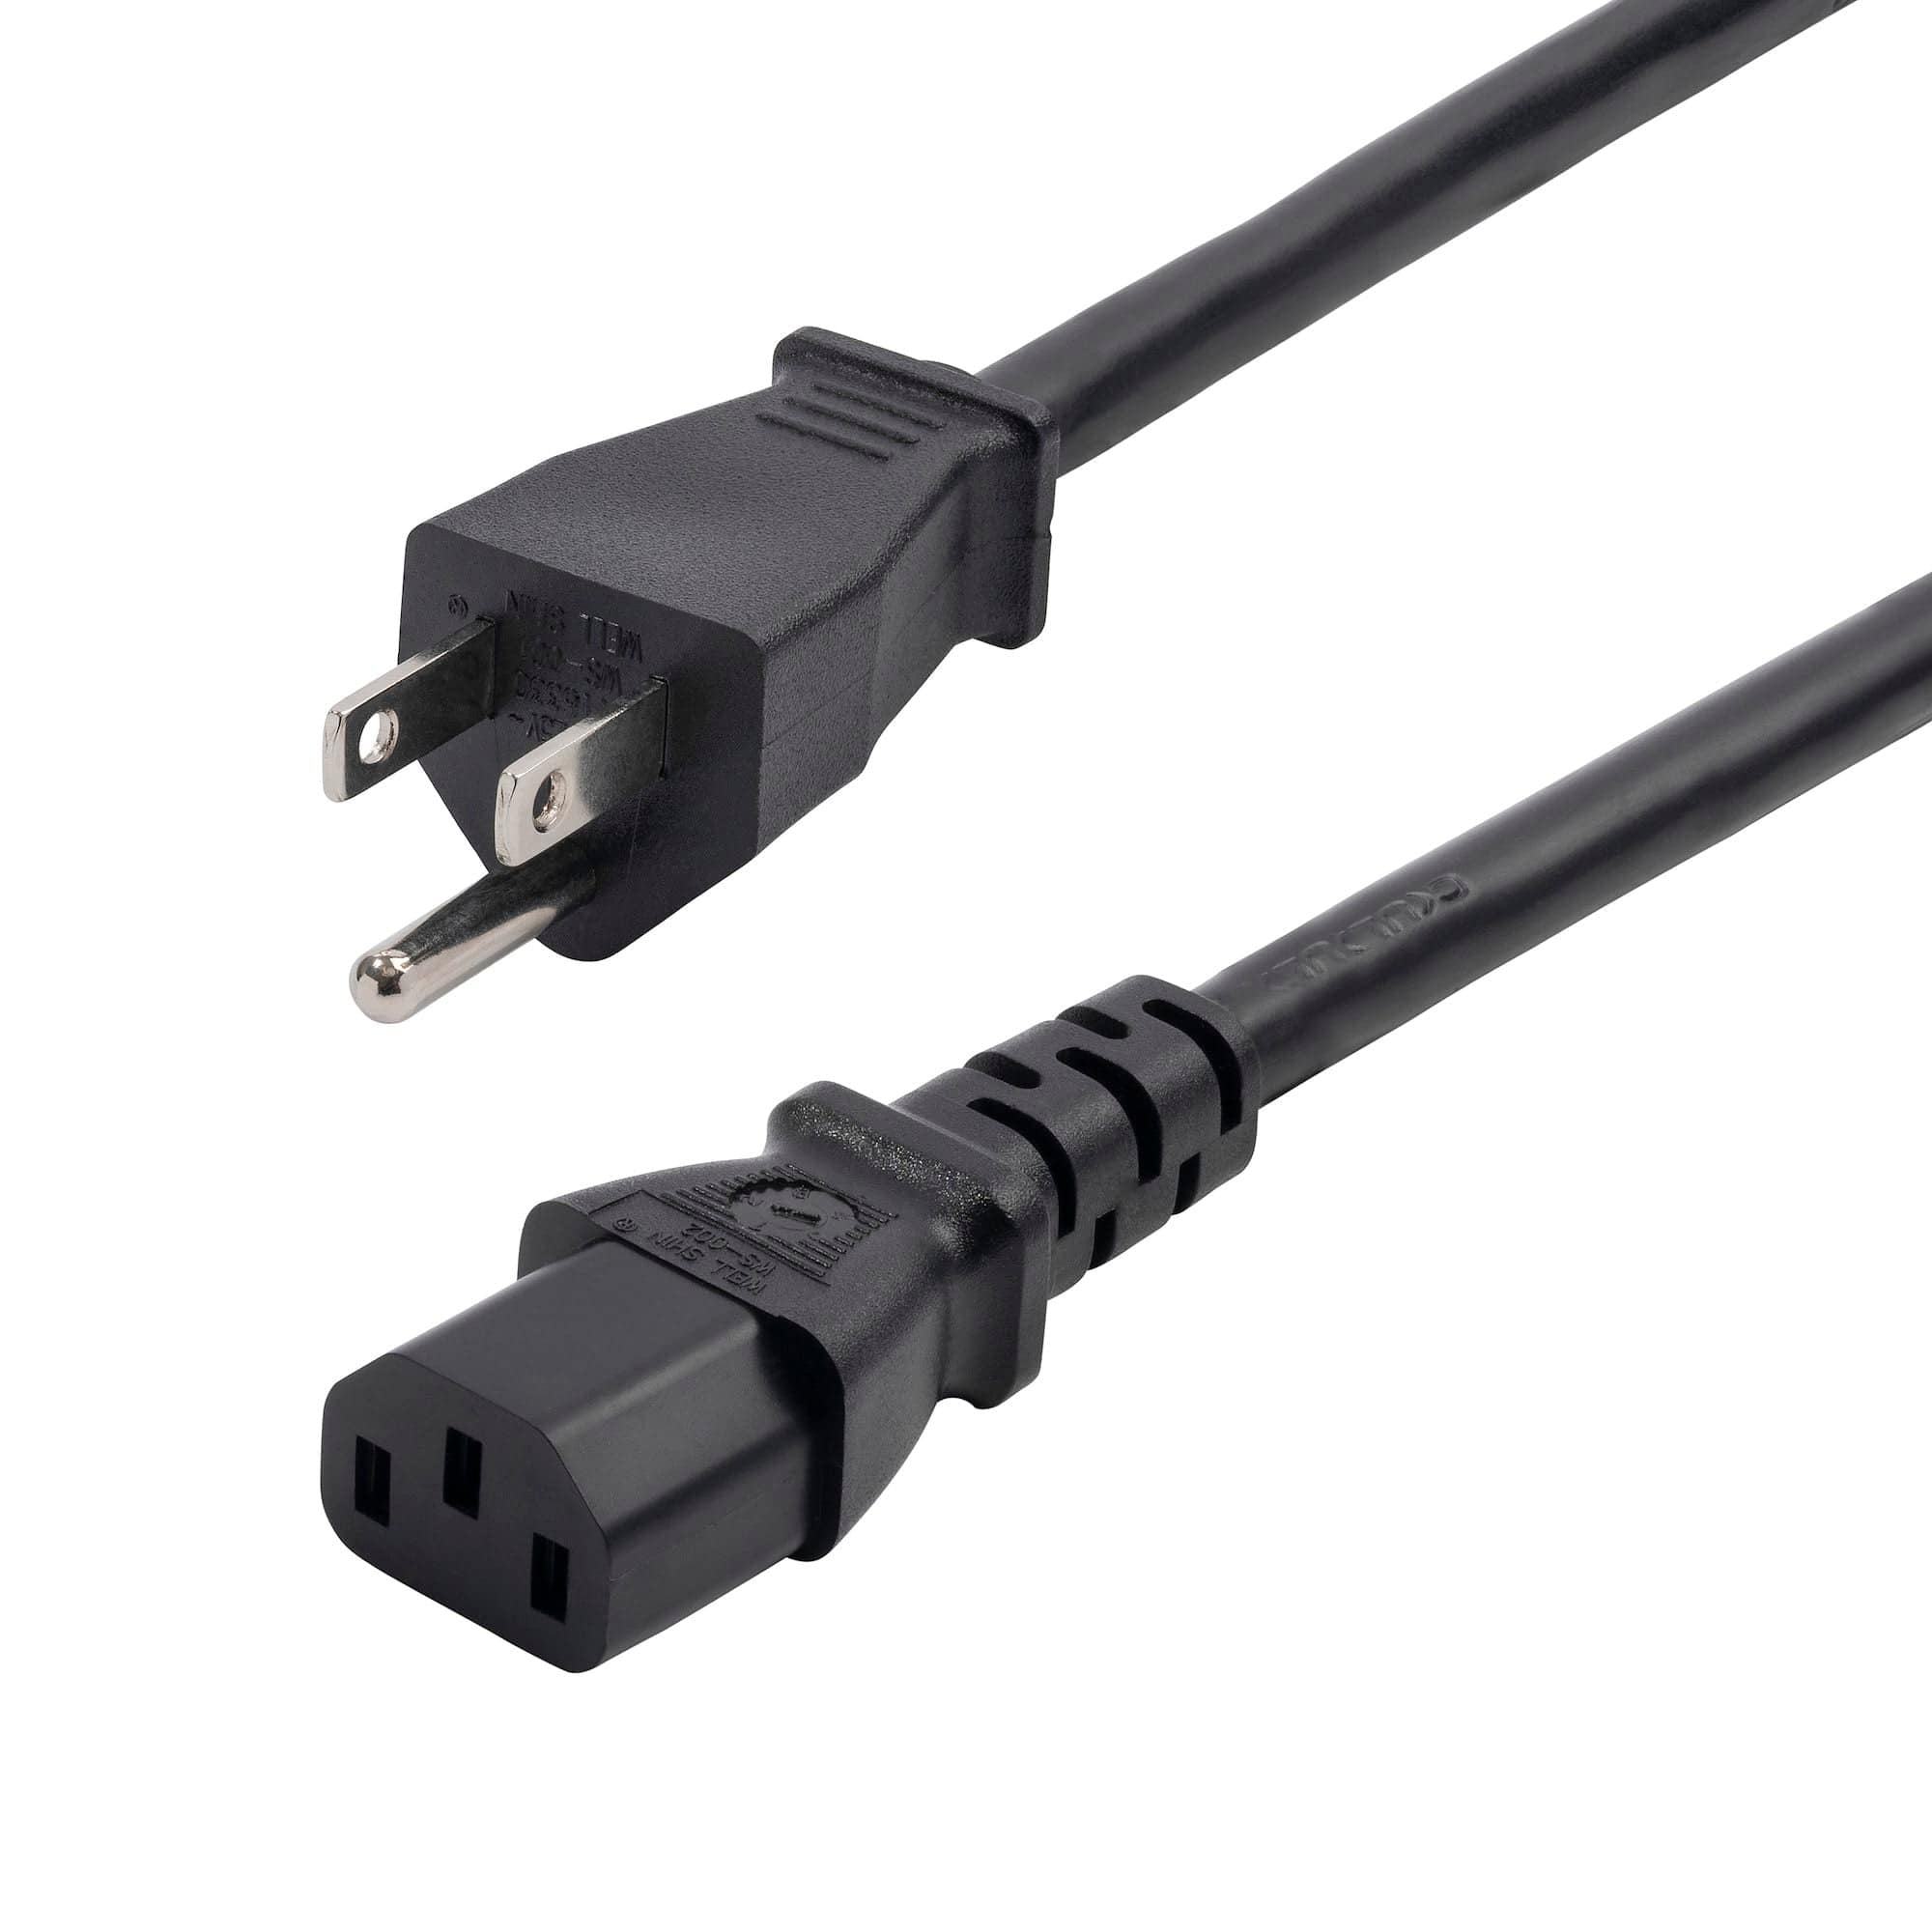 Startech 271B-6800-POWER-CORD 8ft (2.4m) Computer Power Cord, NEMA 5-15P to IEC 60320 C13 AC Power Cable, 13A 125V, 16AWG, Monitor Power Cable, PC Power Supply Cable - UL Listed Components